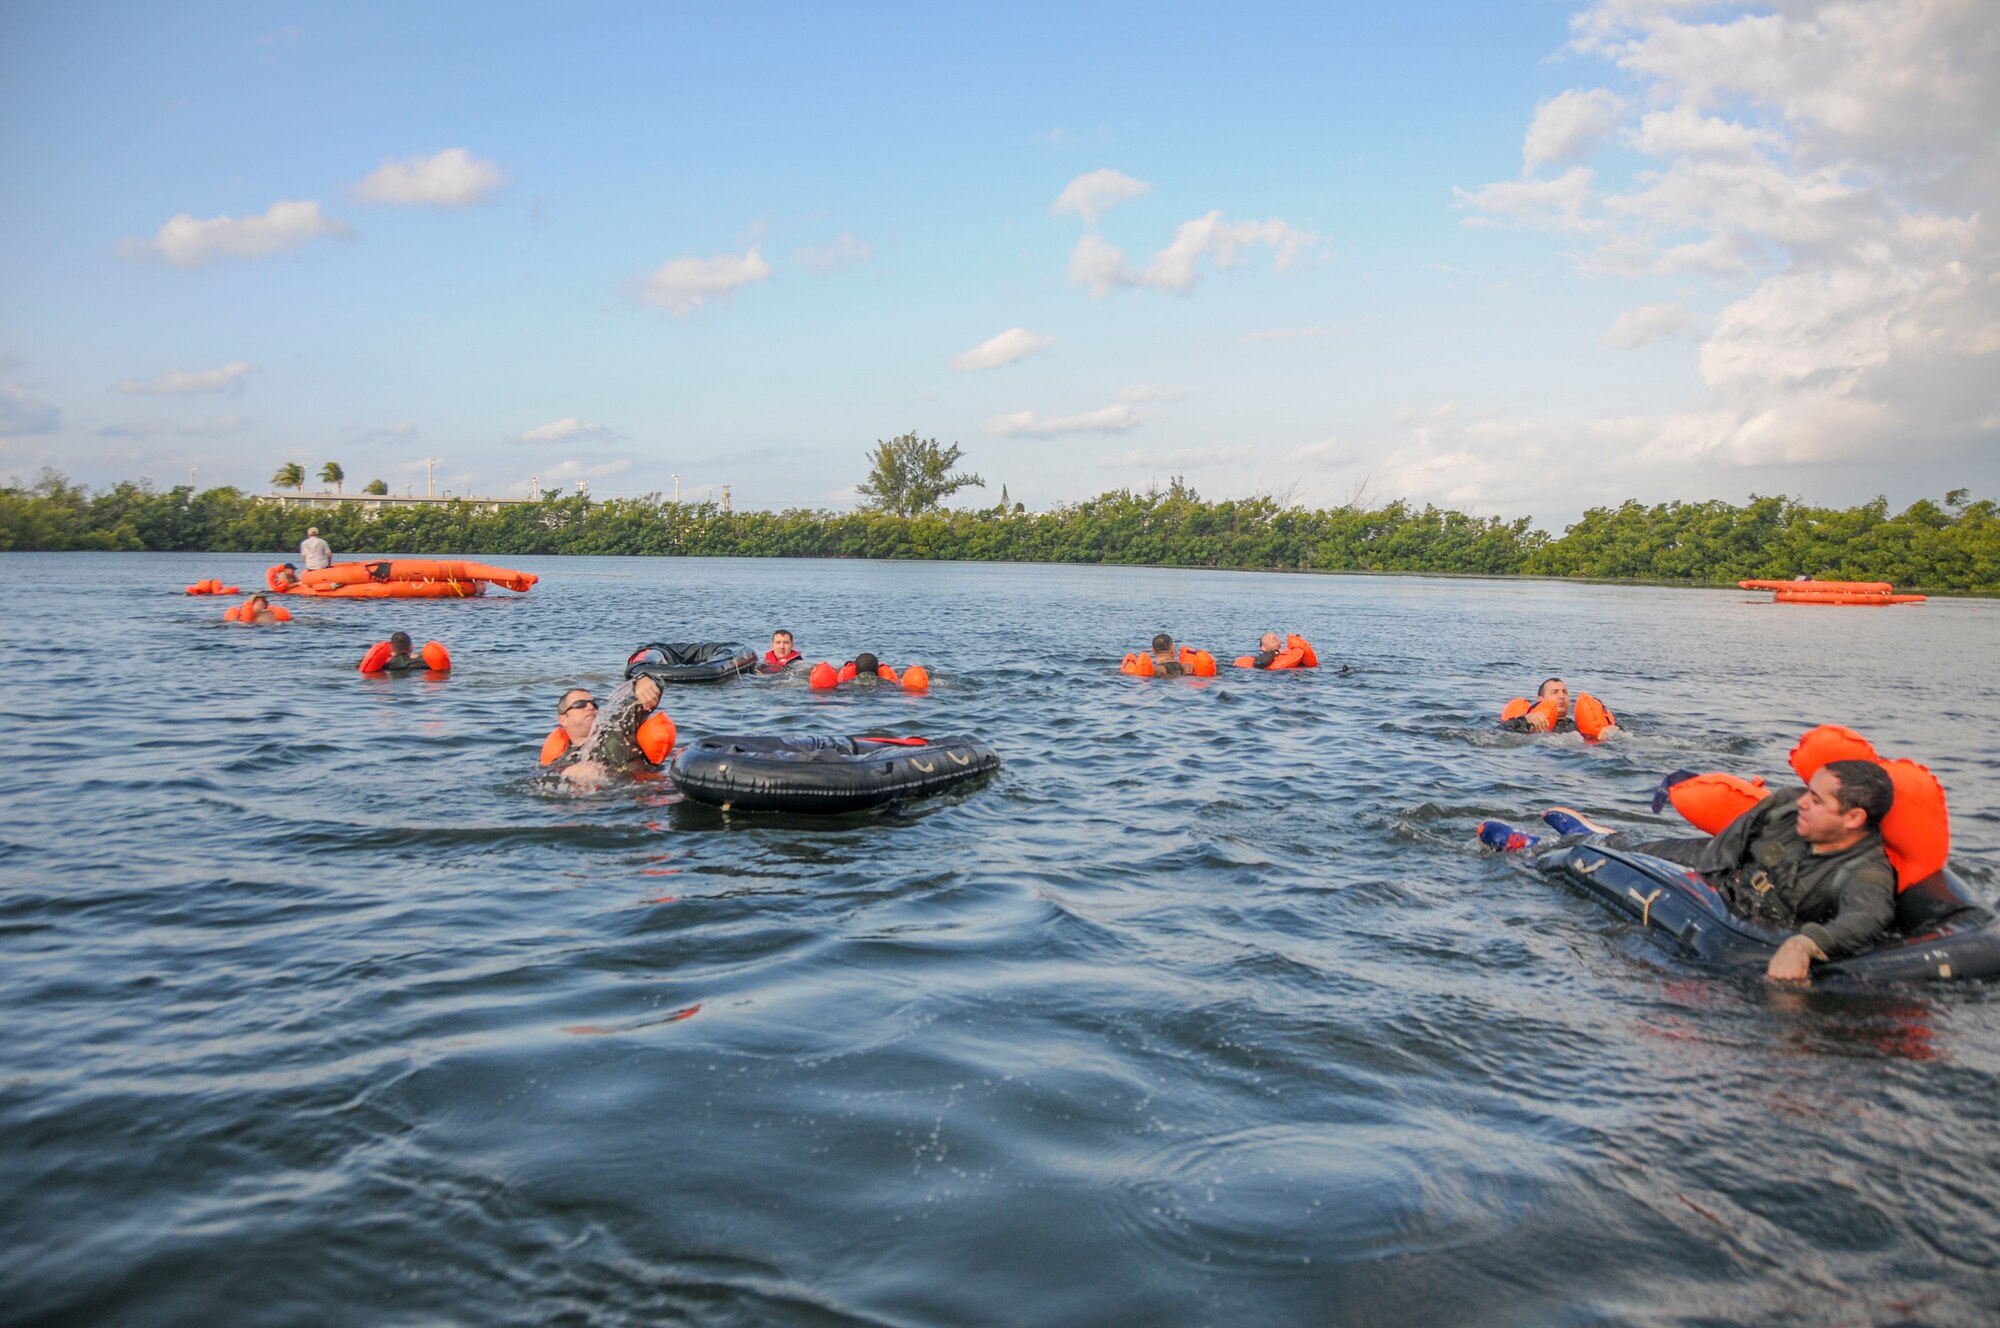 Members of the 94th Operations Group participate in Water Survival Training at Naval Air Station Key West, Florida March 27, 2019. The two-day Survival, Evasion, Resistance and Escape course prepared aircrew, aeromedical and aircraft flight equipment personnel how to deal with emergencies on water and land. (U.S. Air Force photo/Senior Airman Justin Clayvon)